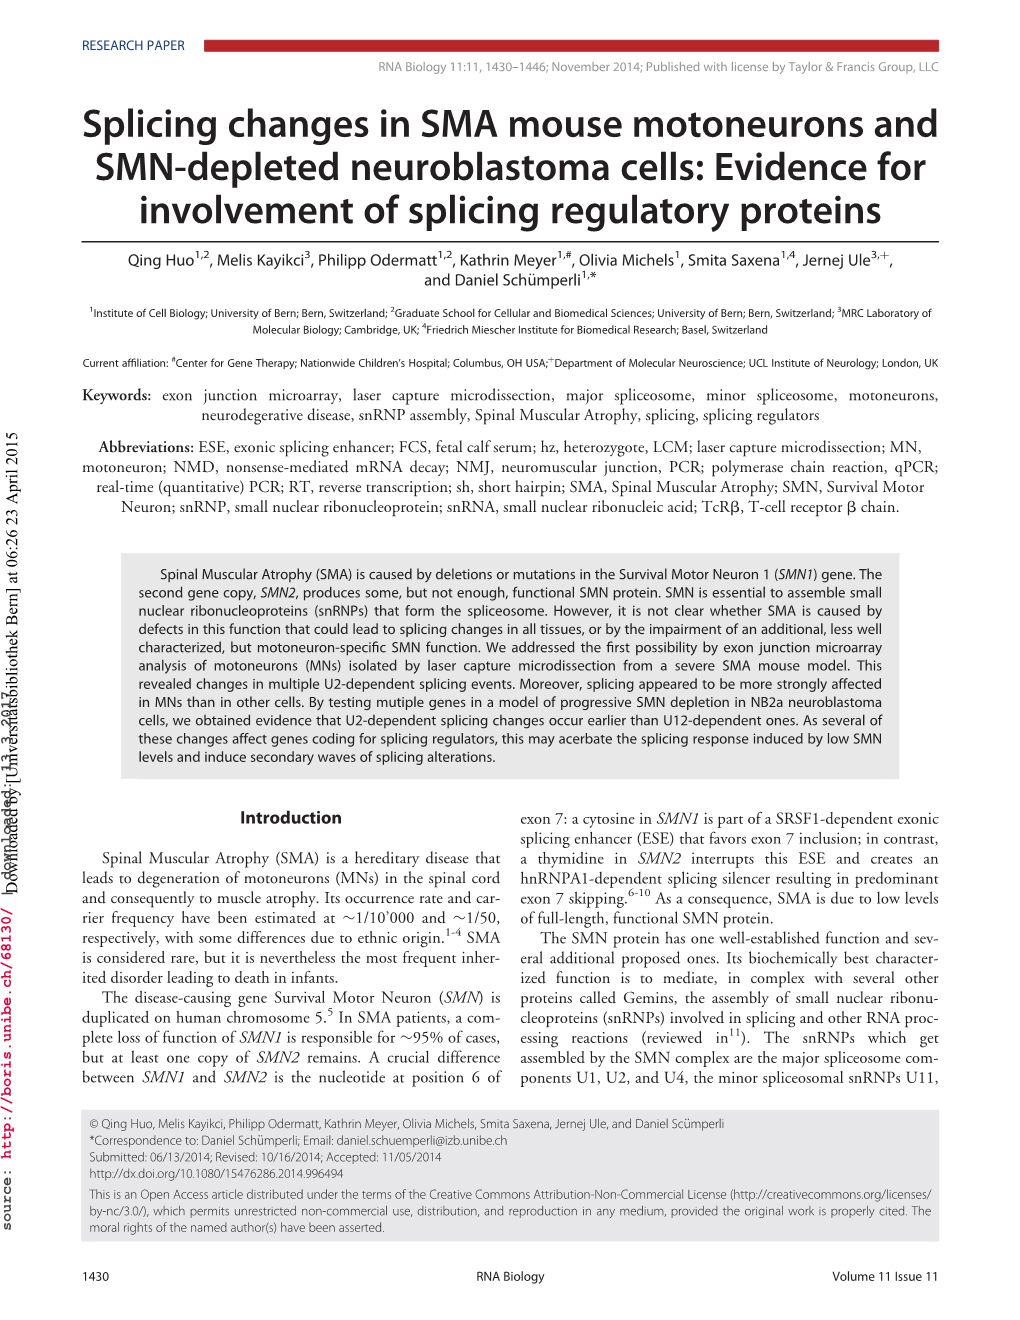 Evidence for Involvement of Splicing Regulatory Proteins